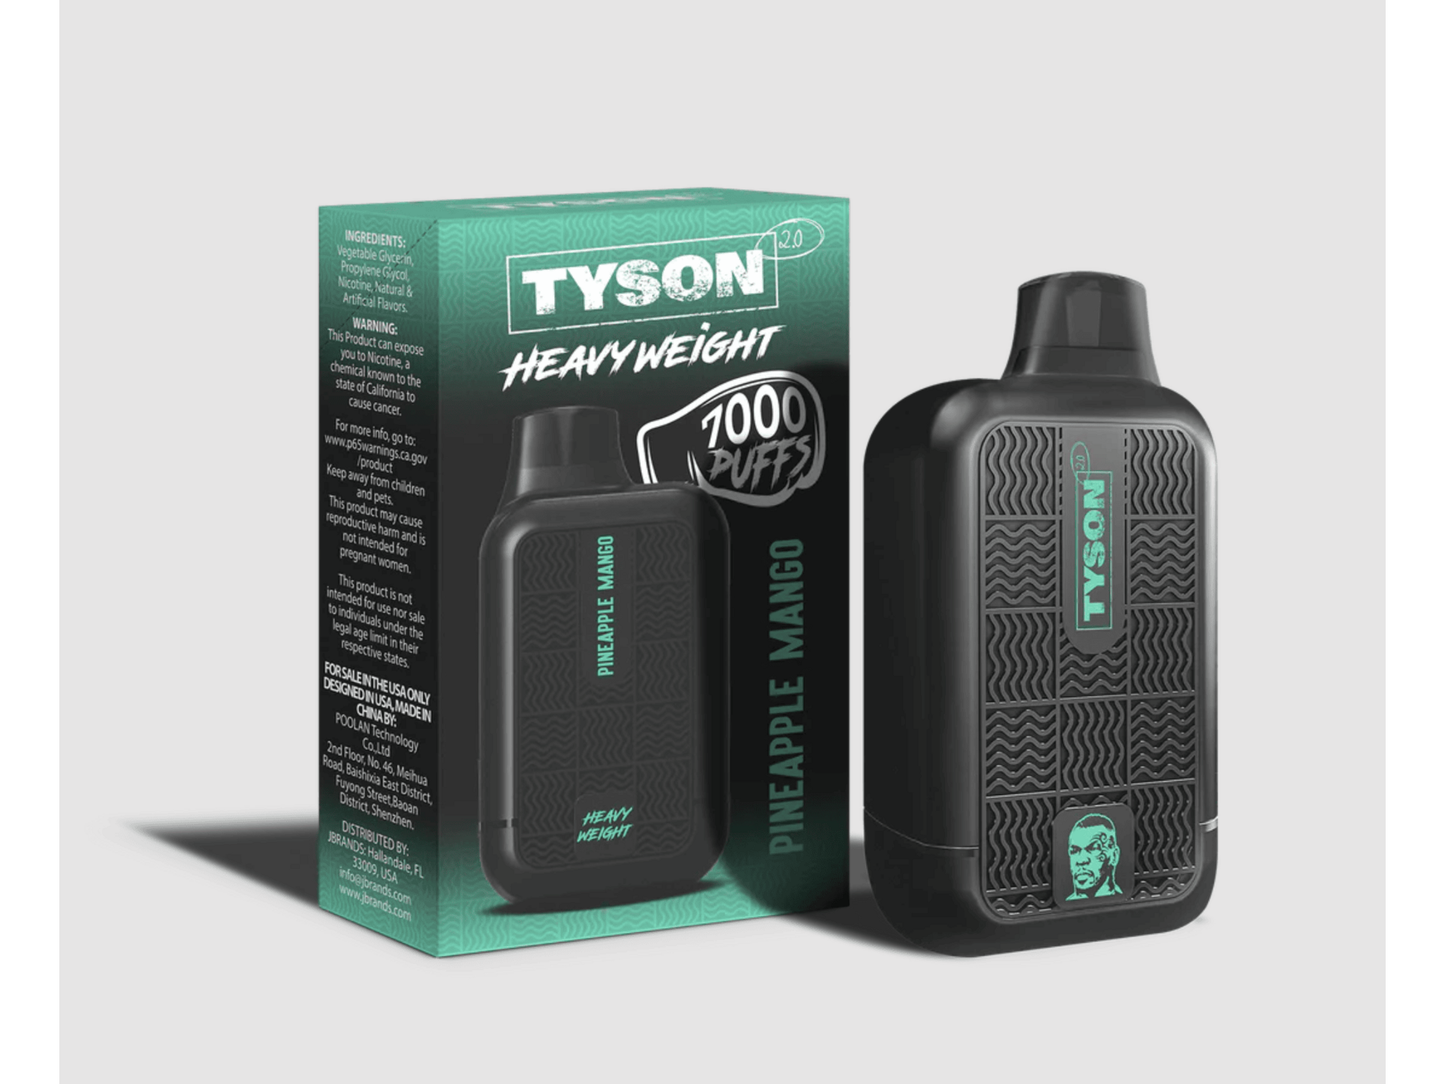 Tyson Heavyweight Pineapple Mango flavored disposable vape device and box.